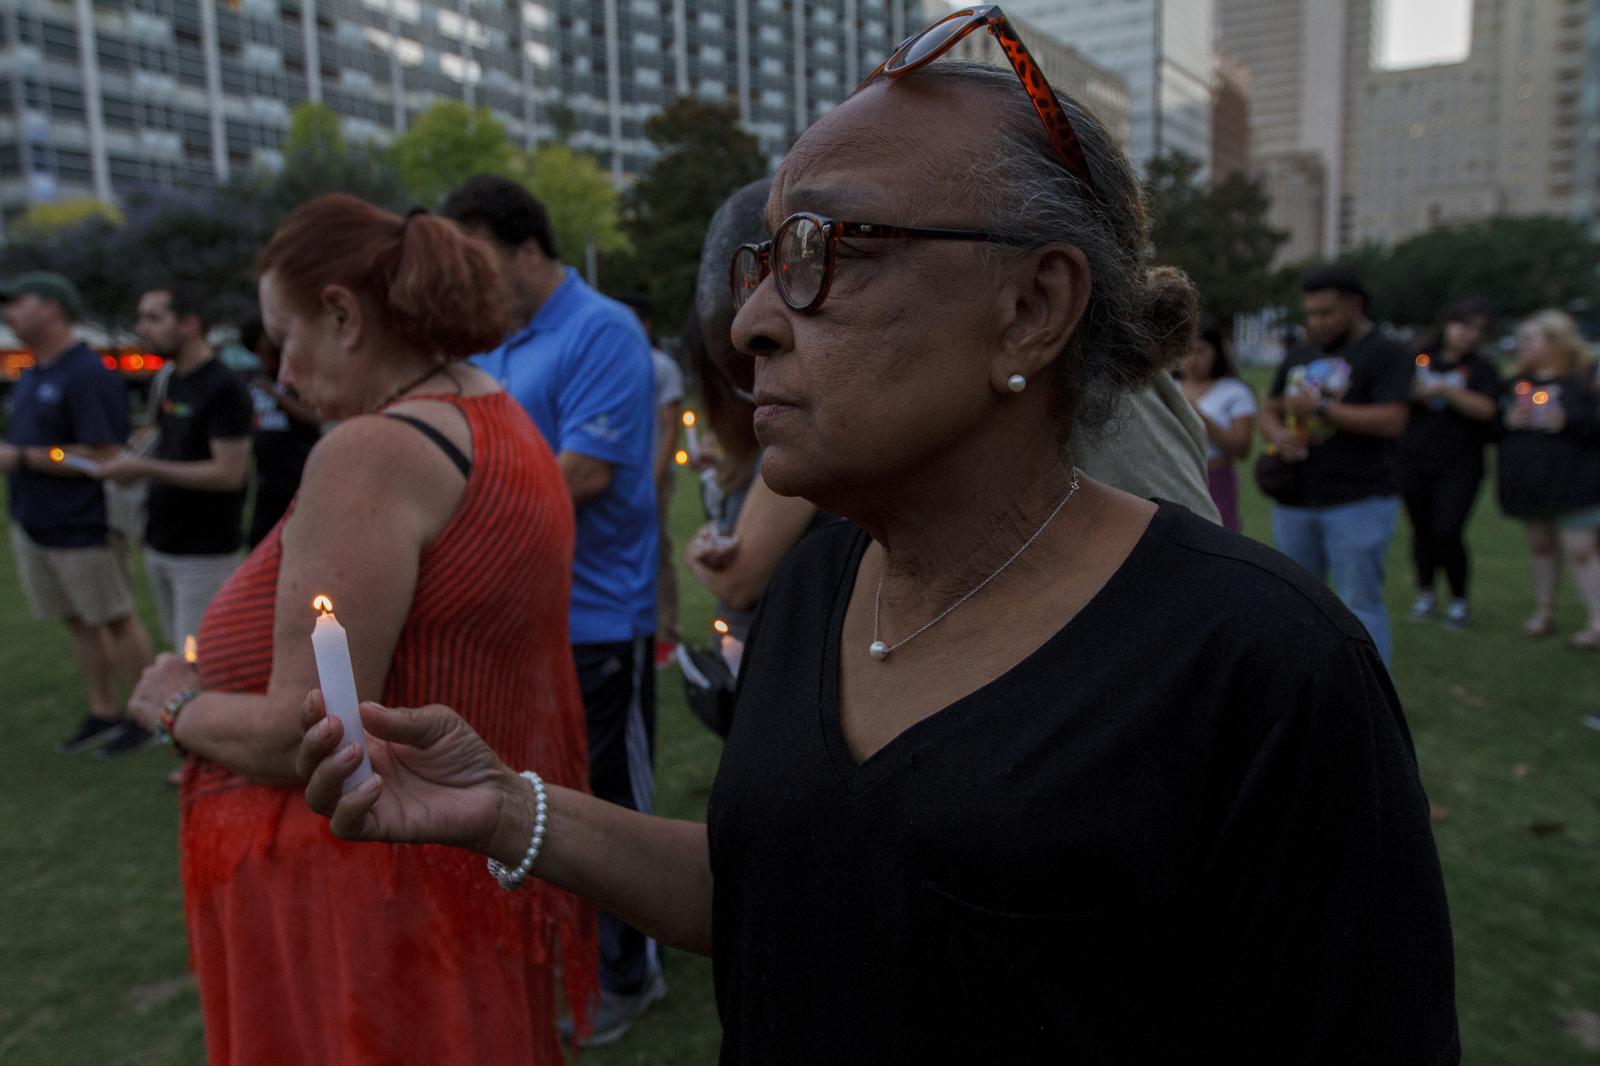 Candlelight Vigil for the Buffalo and Uvalde gun violence victims | Buy this image